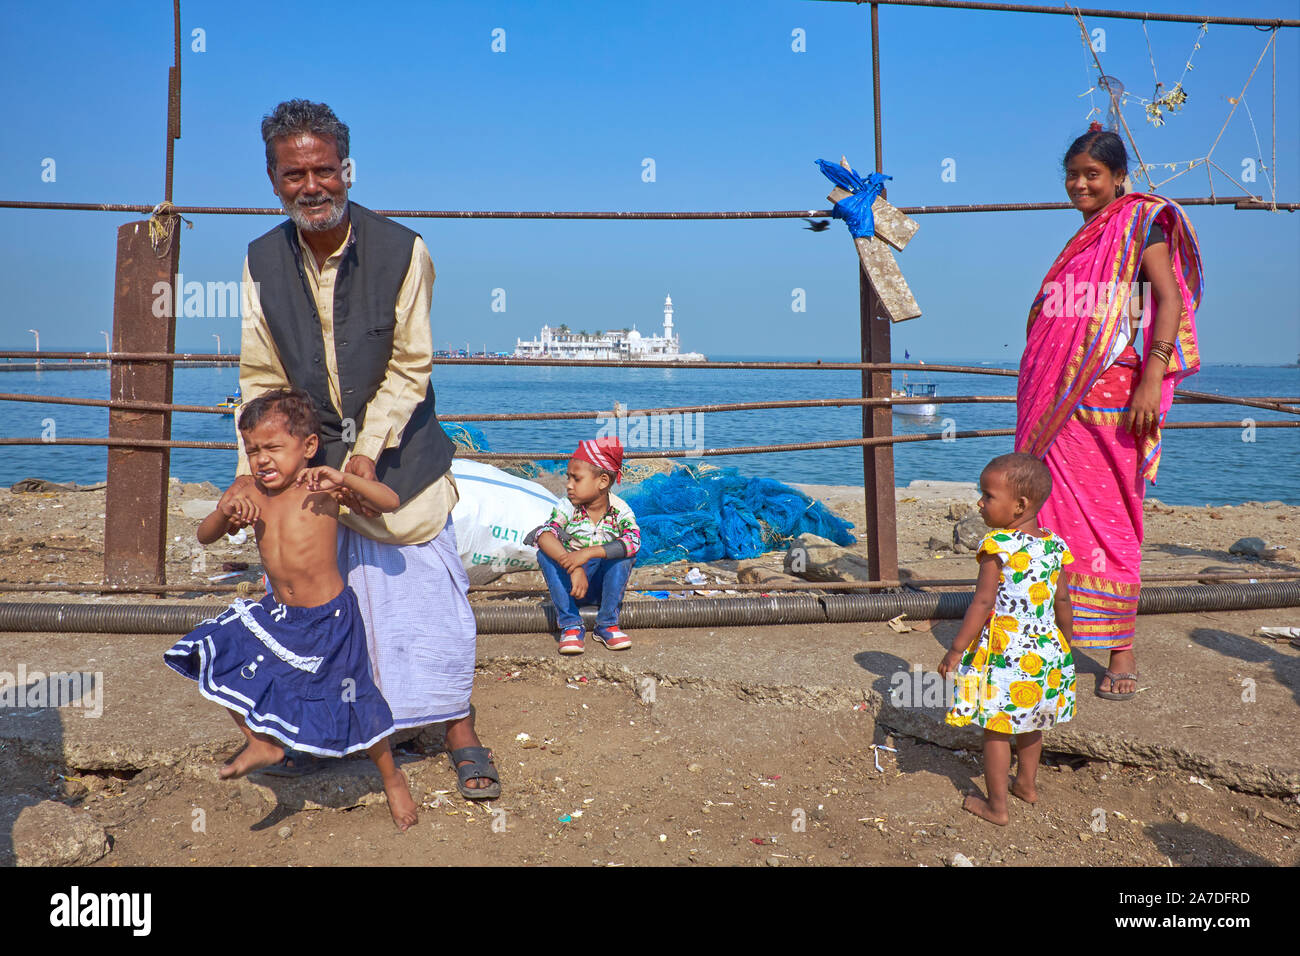 A sightseeing Muslim family of five at Worli Bay, Mumbai, India, the iconic Haji Ali Mosque in the b/g, the father trying to control his unruly son Stock Photo